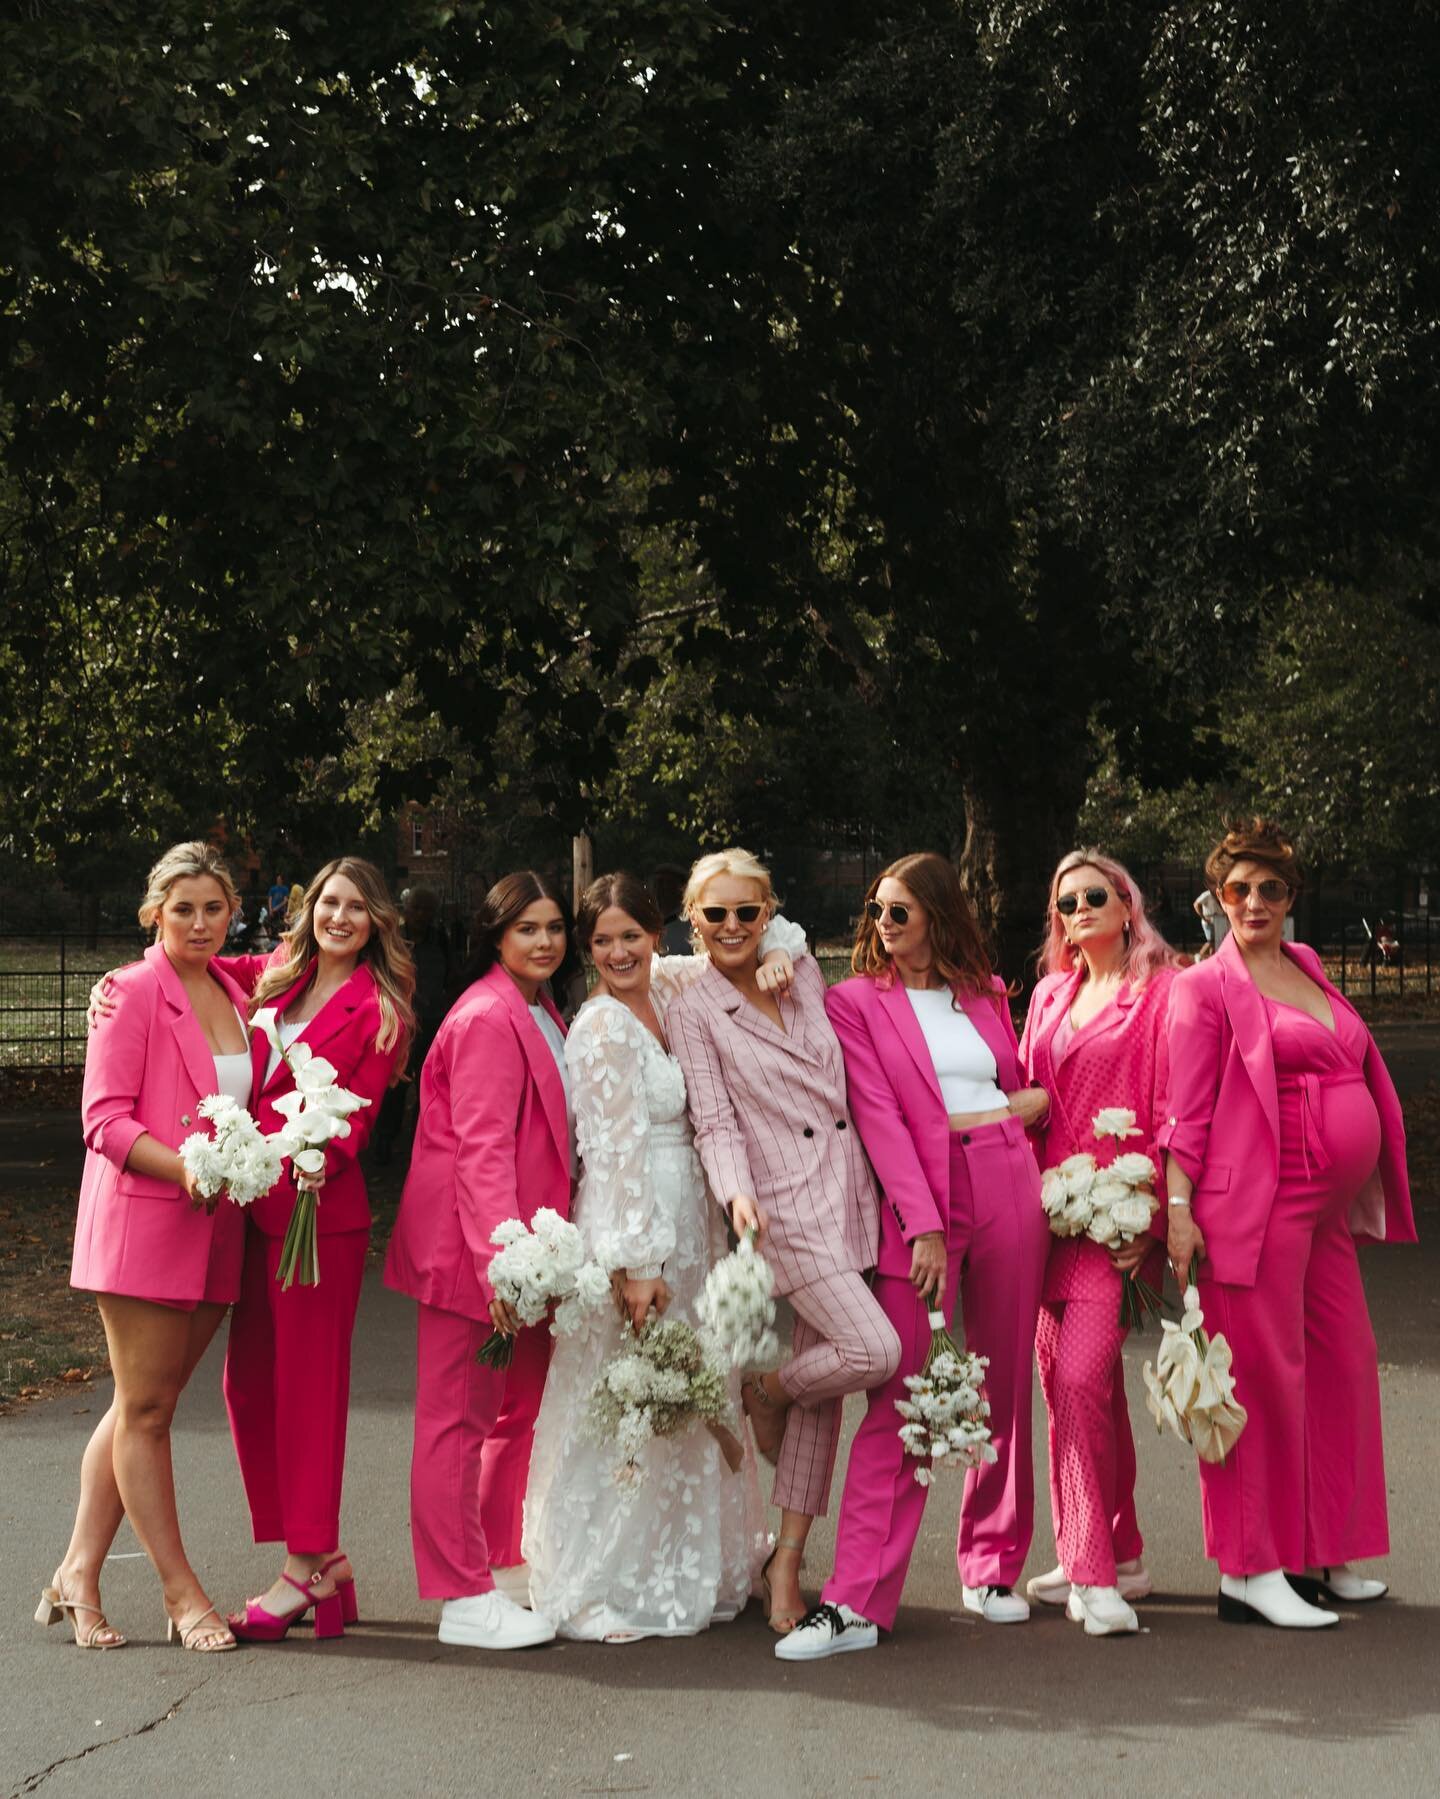 My best women and BRIDETRIBE. 

Single stem bouquets of their favourite flowers contrasted against those popping pink suits. 

Couldn&rsquo;t love them more. 

📸 @beatriciphotography 

💕💕💕💕💕💕💕

#bridesmaids #bridetribe #bestwomen #bridemaidsd